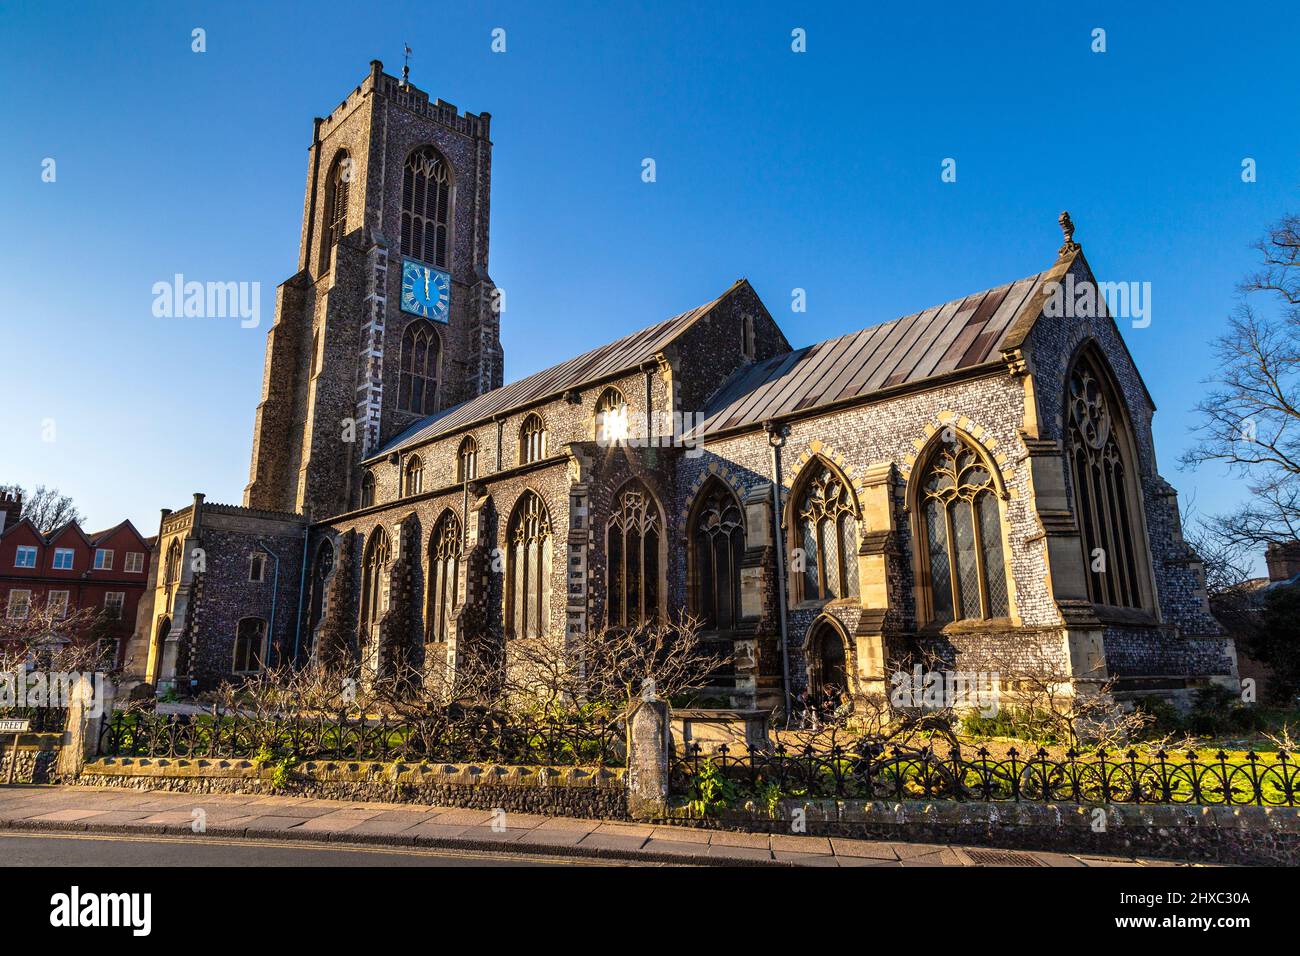 Exterior of decorated gothic style St Giles on the Hill church, Norwich, Norfolk, UK Stock Photo